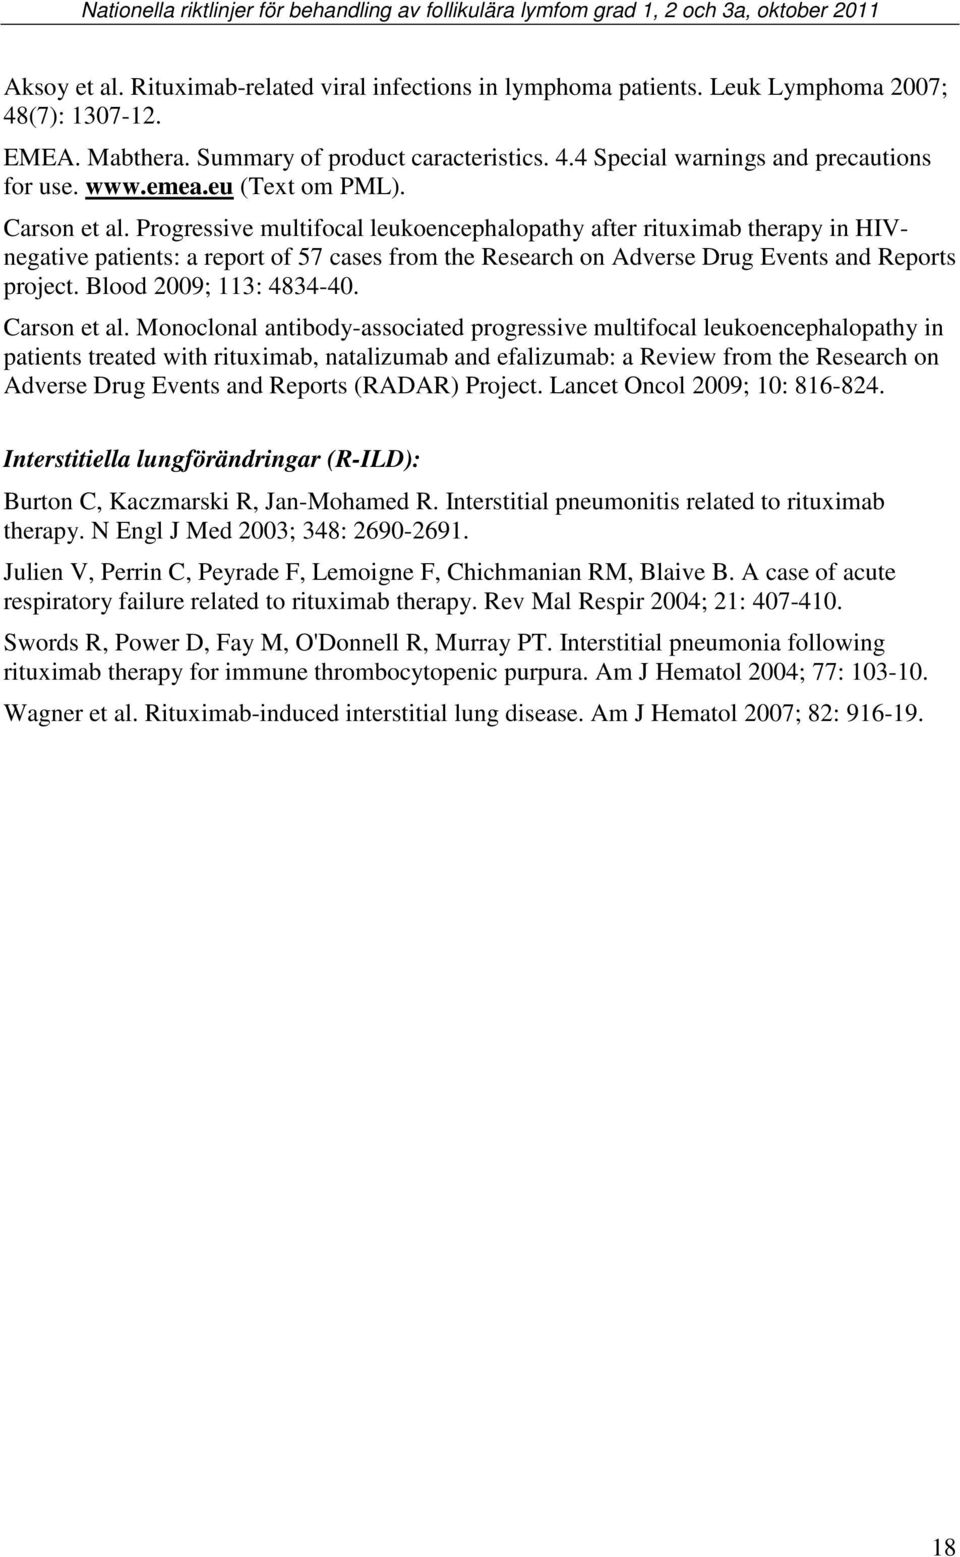 Progressive multifocal leukoencephalopathy after rituximab therapy in HIVnegative patients: a report of 57 cases from the Research on Adverse Drug Events and Reports project. Blood 2009; 113: 4834-40.